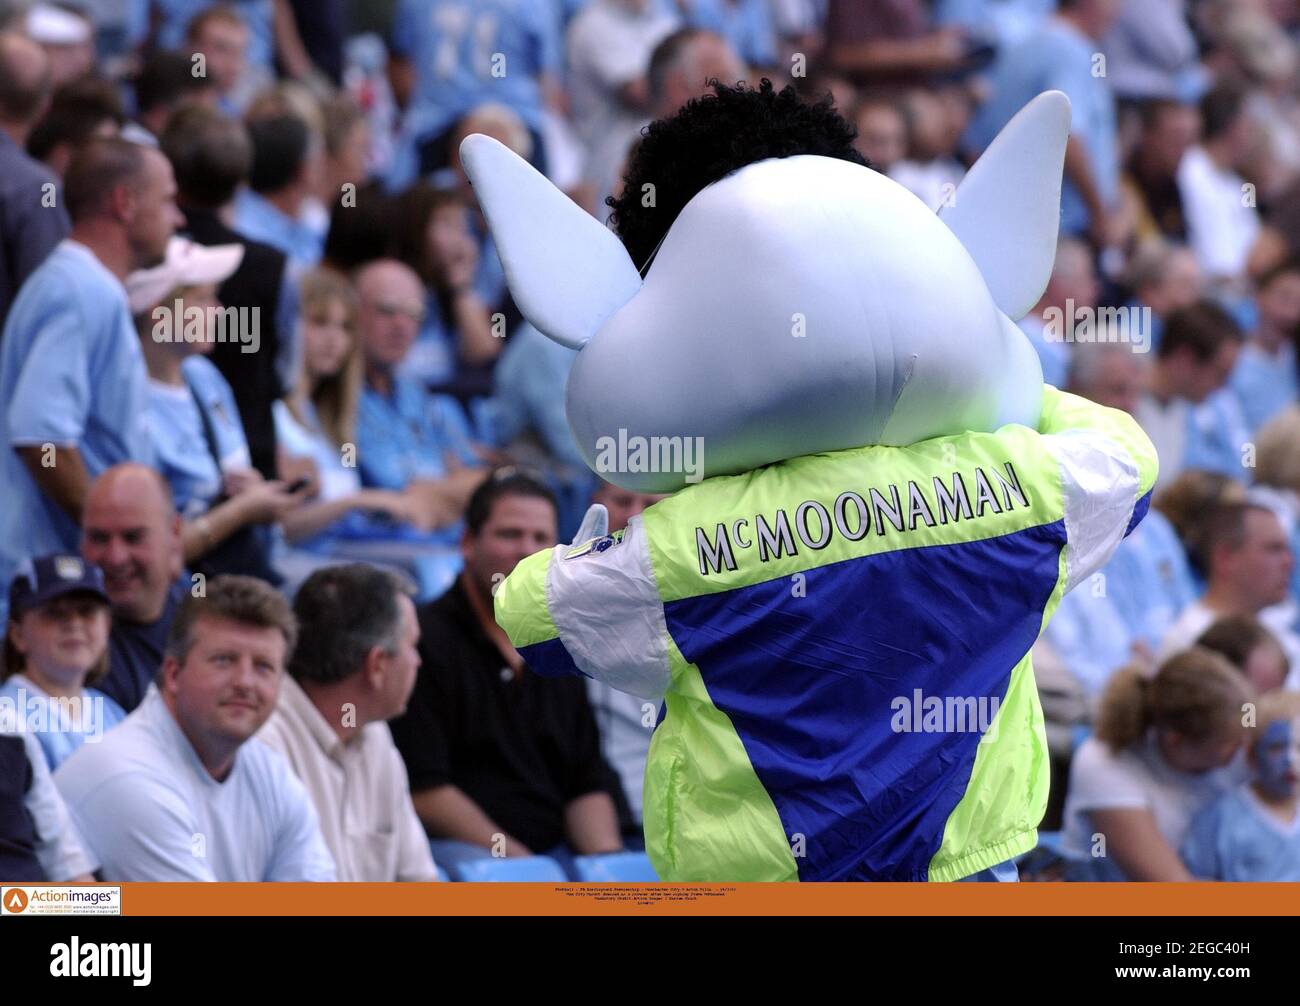 Football - FA Barclaycard Premiership - Manchester City v Aston Villa  - 14/9/03  Man City Mascot dressed as a scouser after new signing Steve McManaman  Mandatory Credit:Action Images / Darren Walsh  LivePic Stock Photo